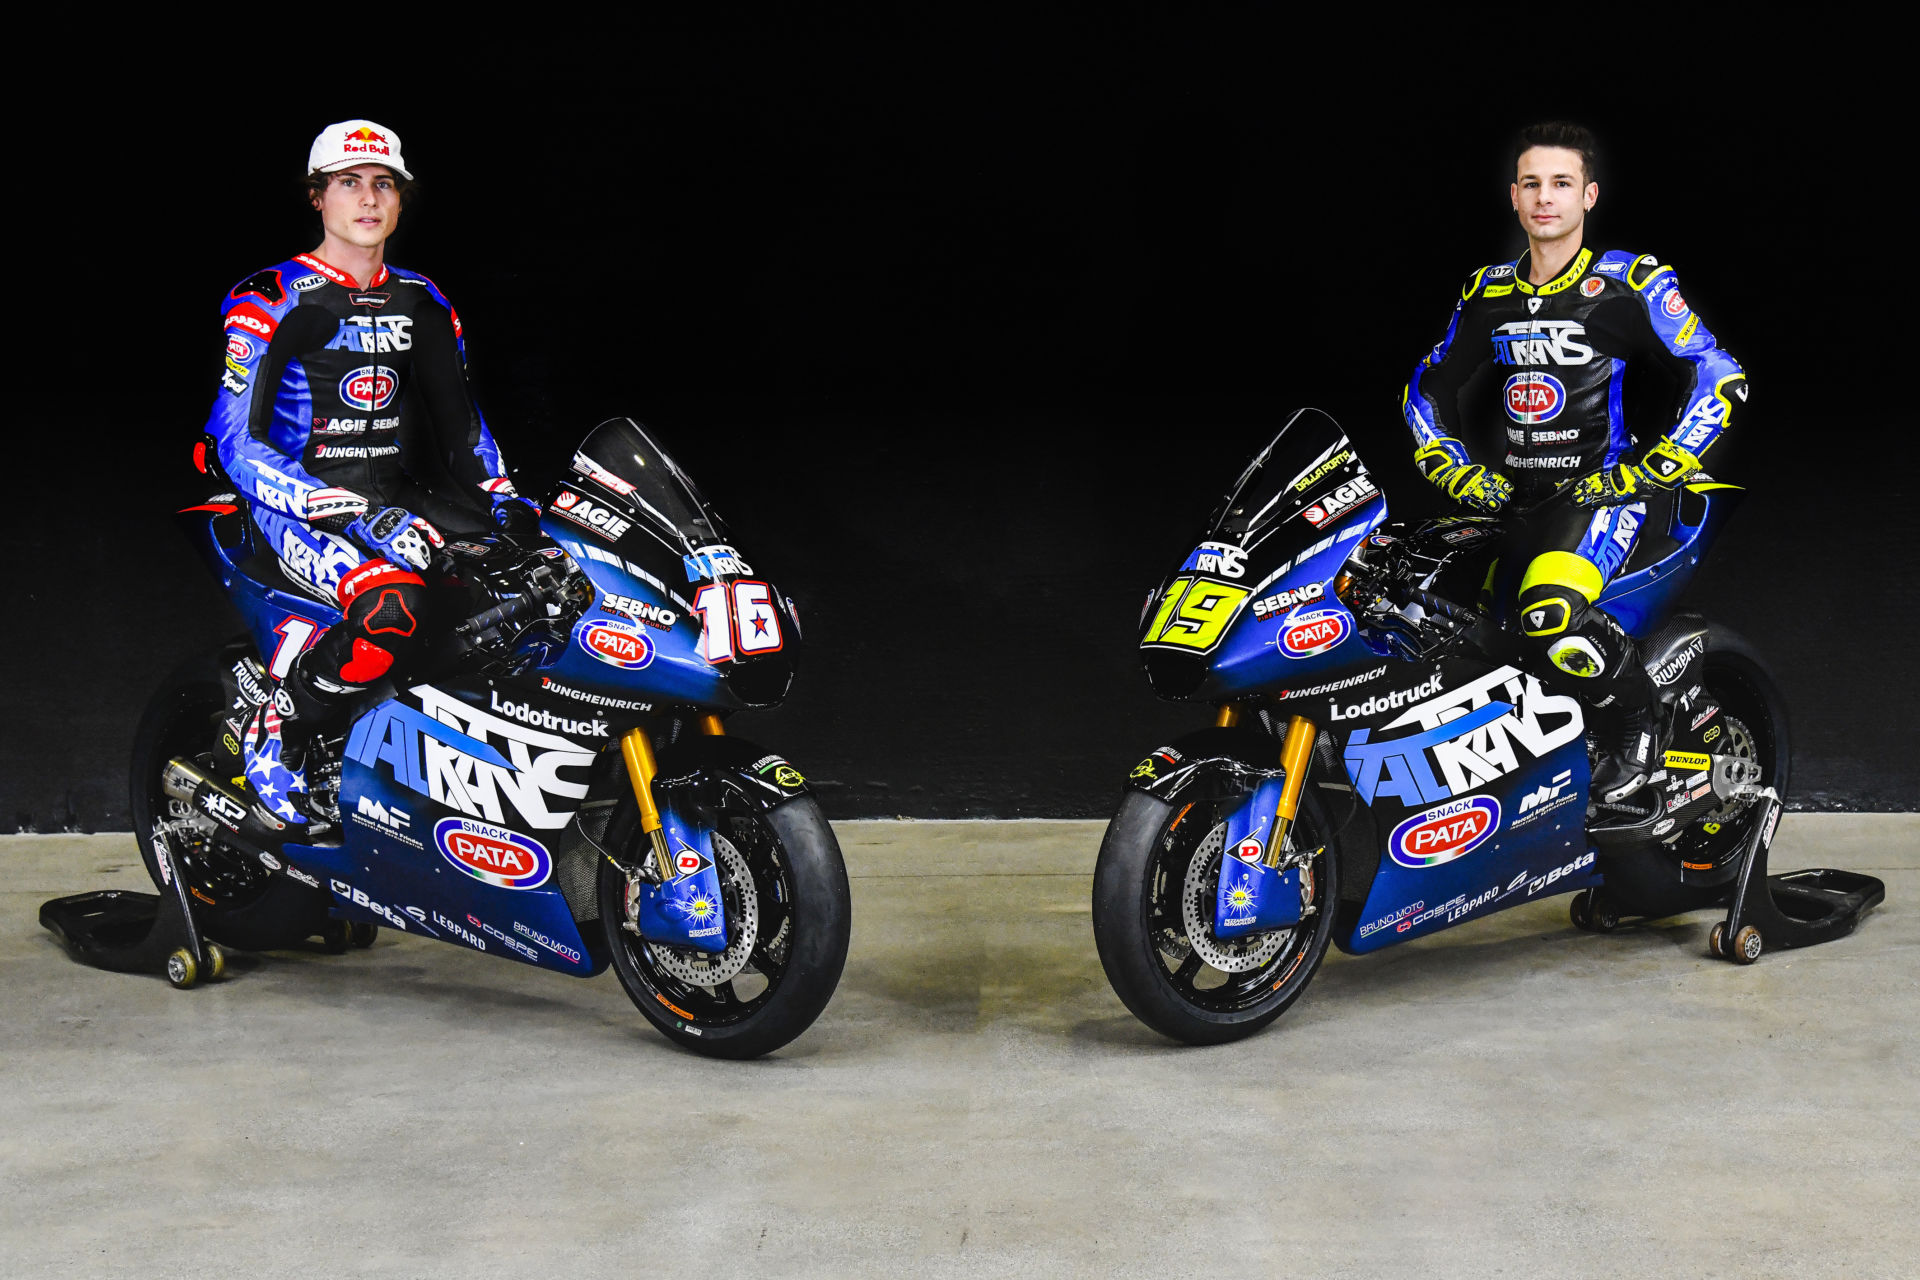 Moto2 Italtrans Racing Team Introduced In Italy